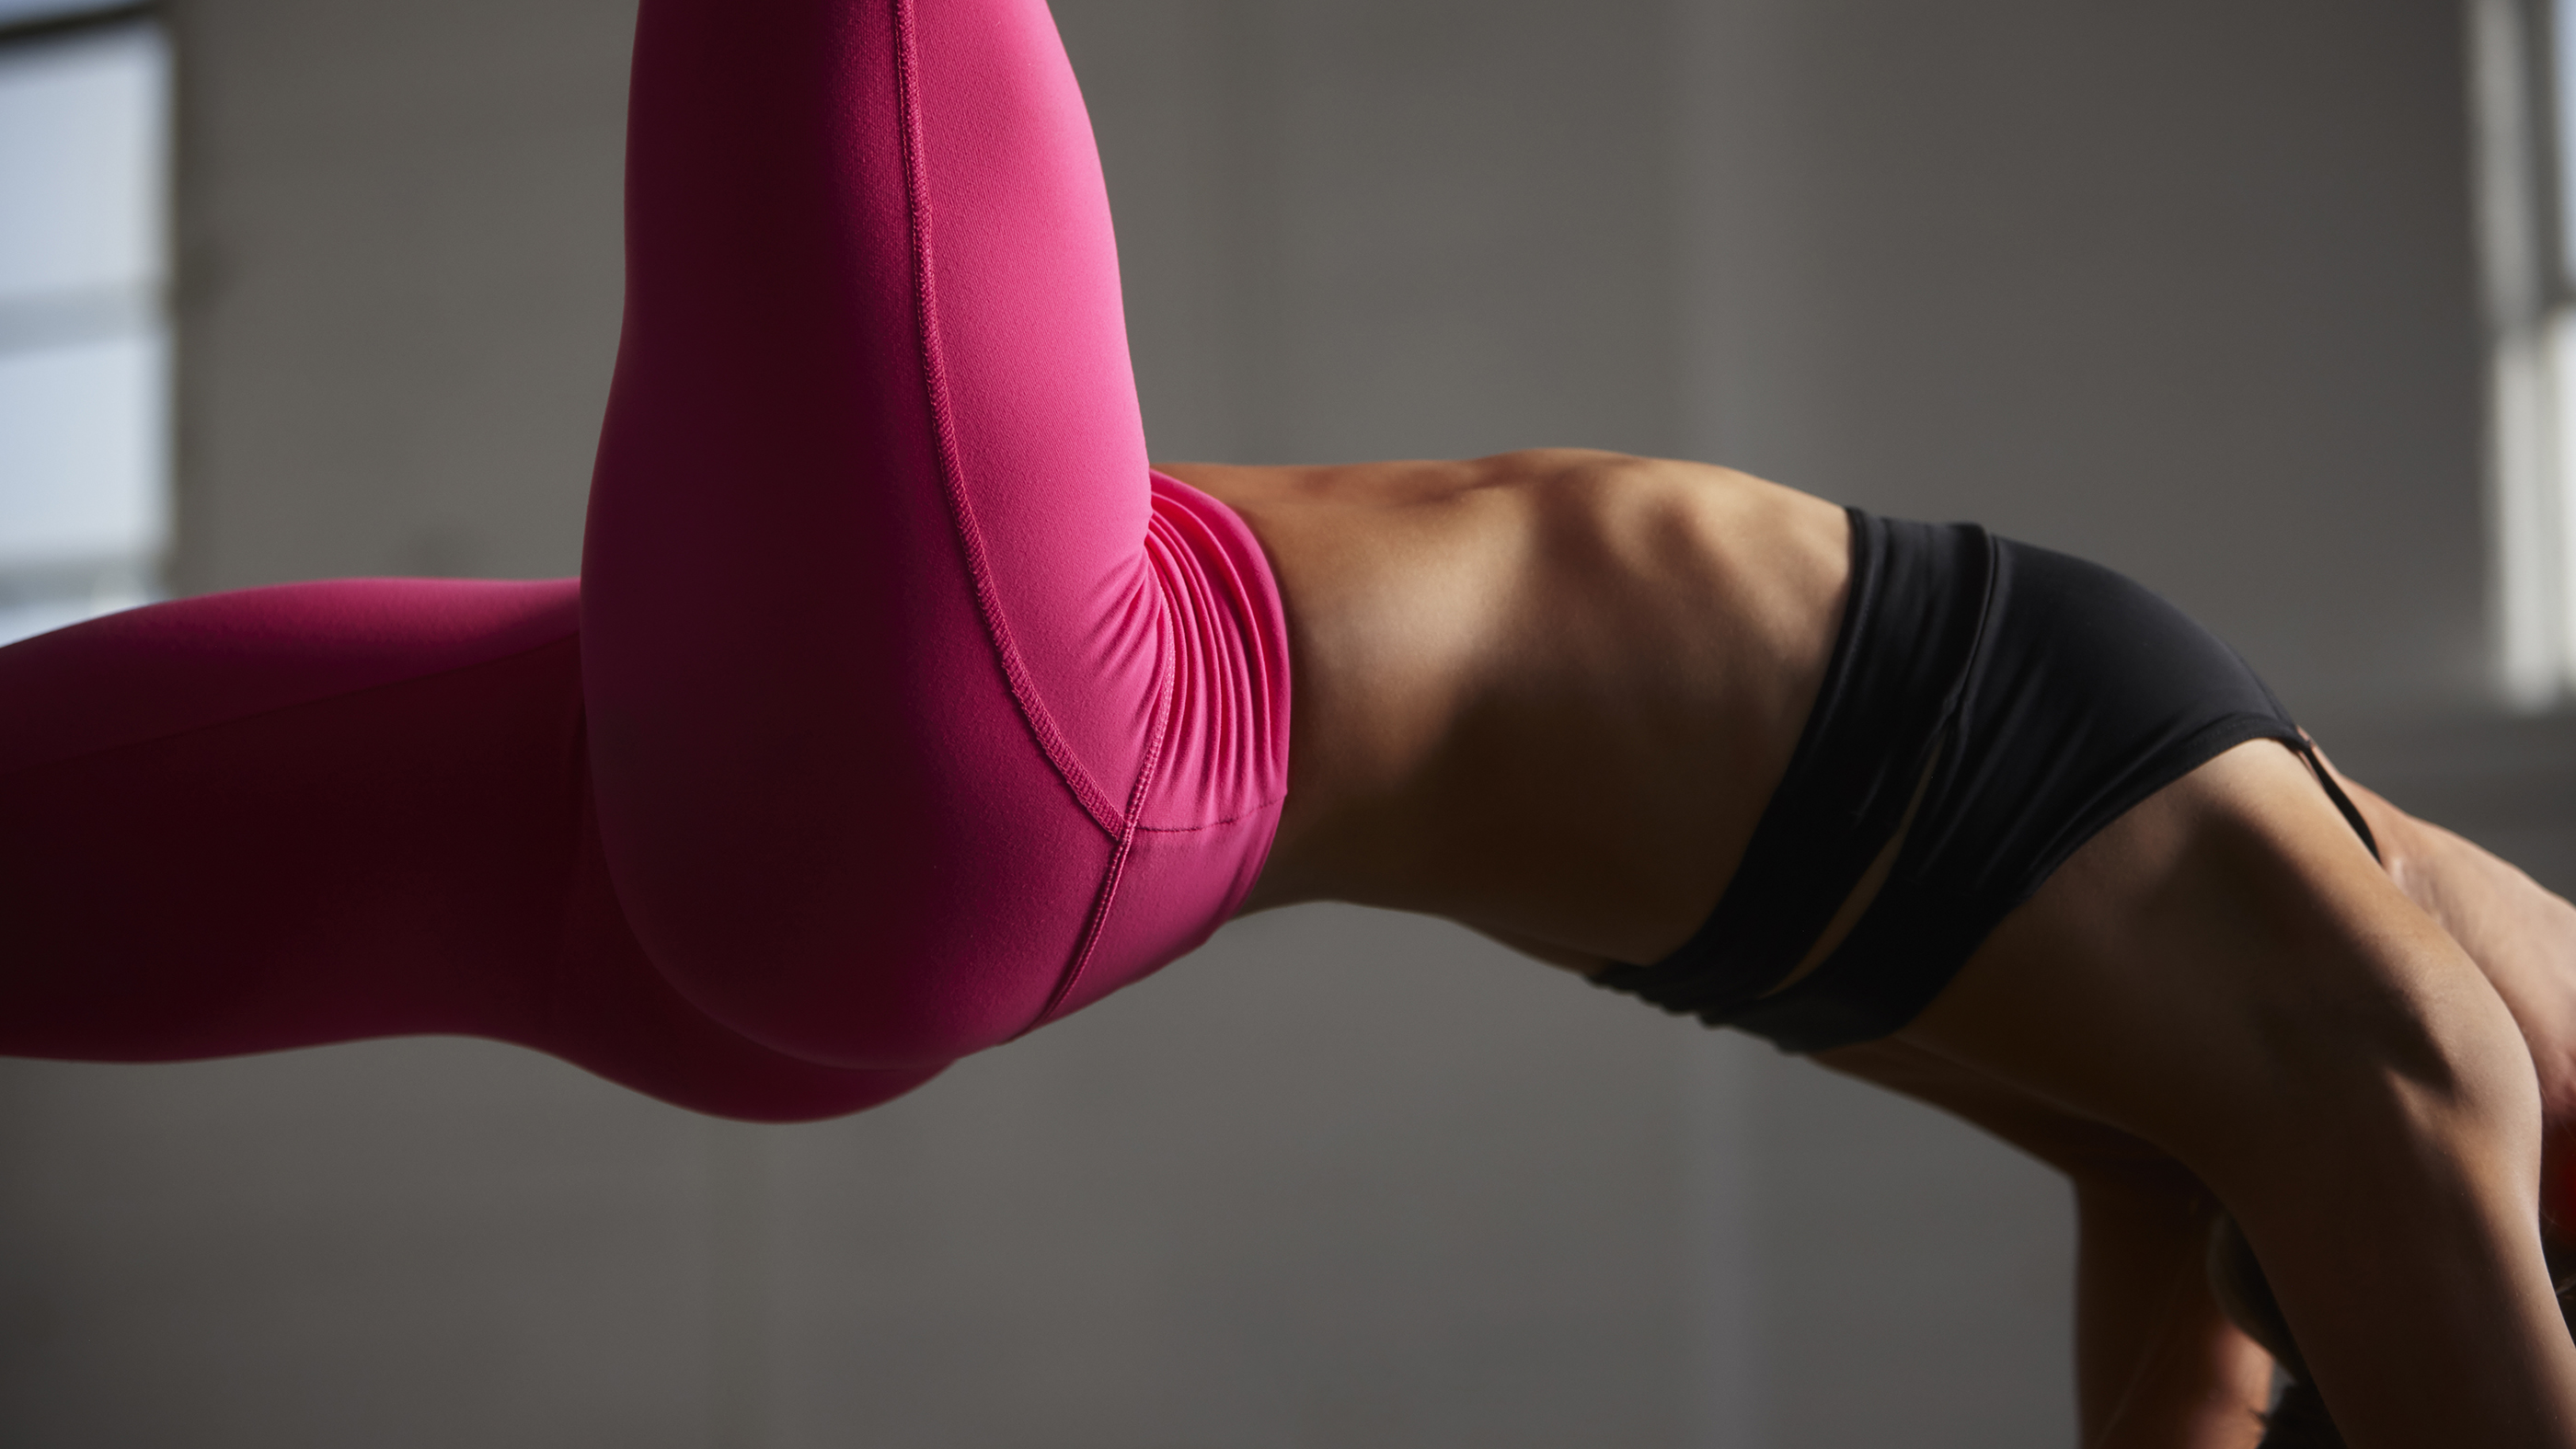 Sports bra deals: What's in stock now